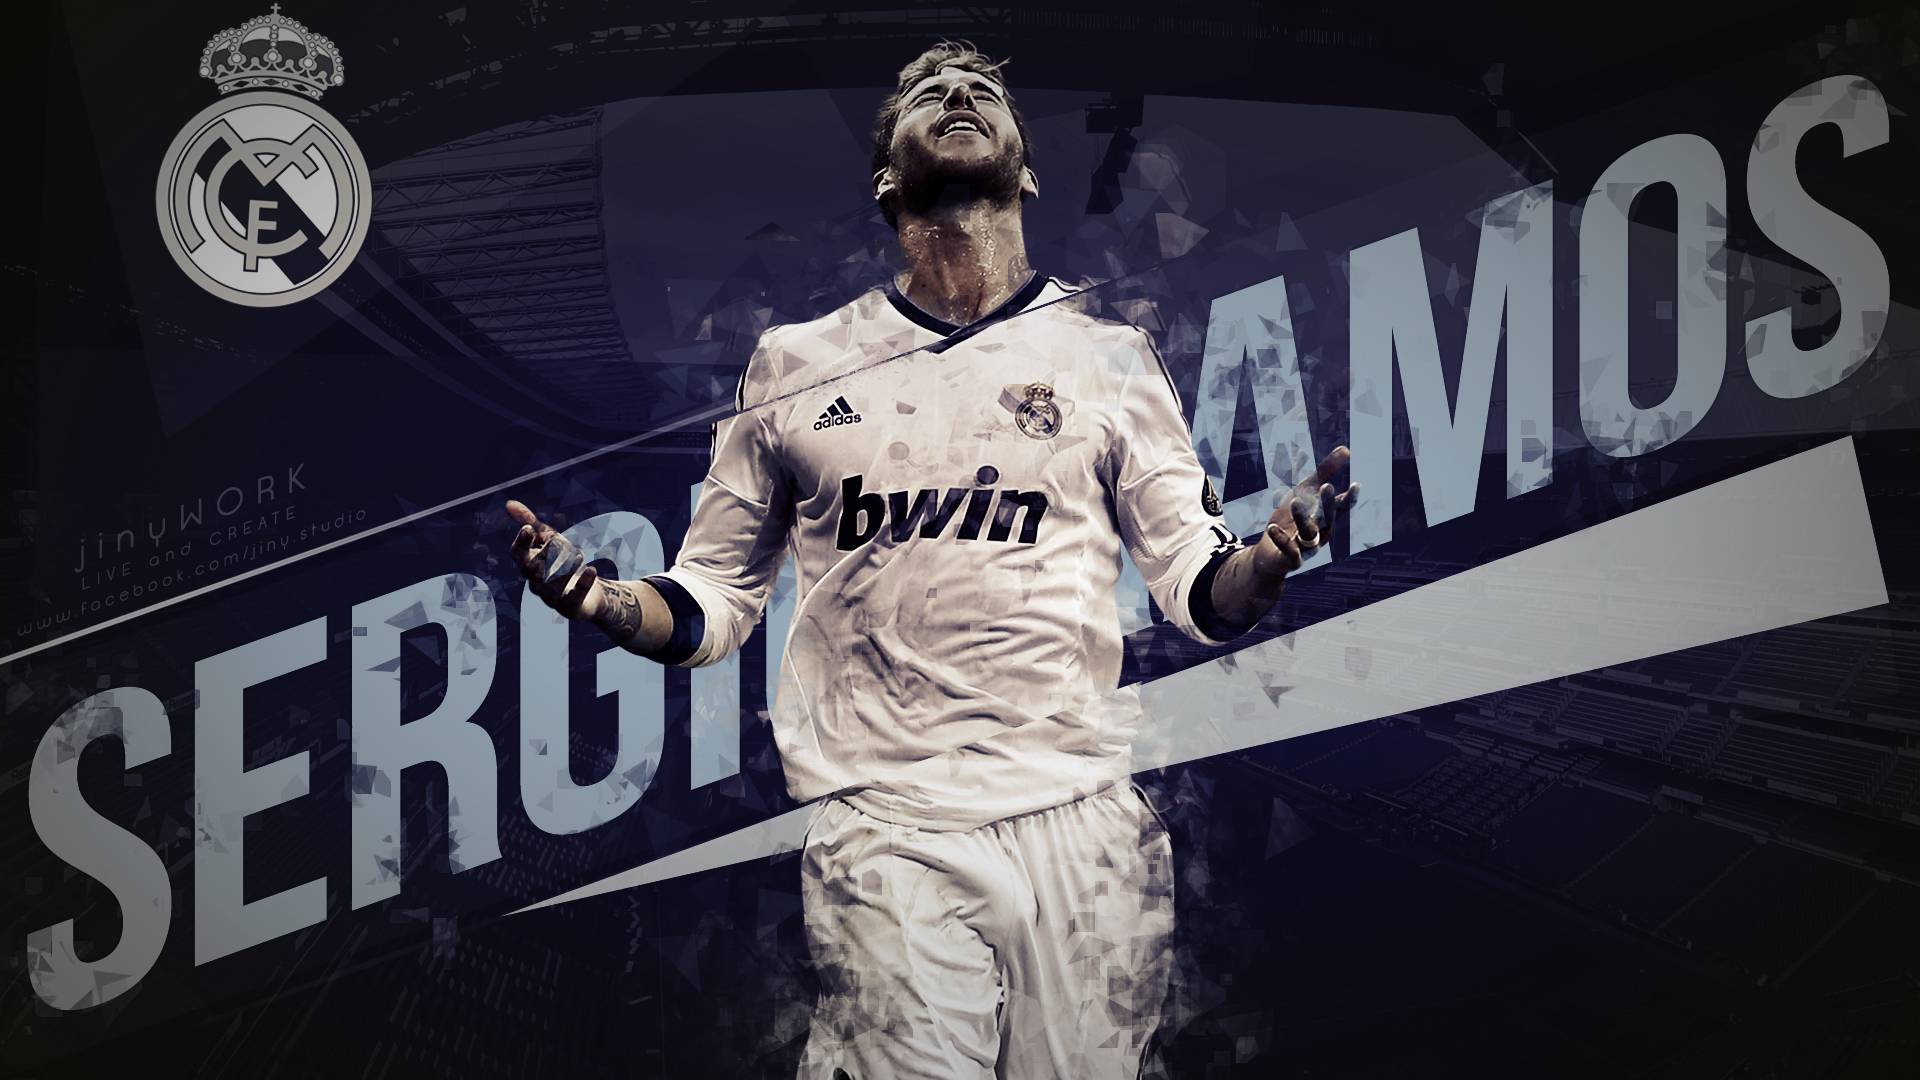 Sergio Ramos, Wallpaper and Picture for mobile and desktop